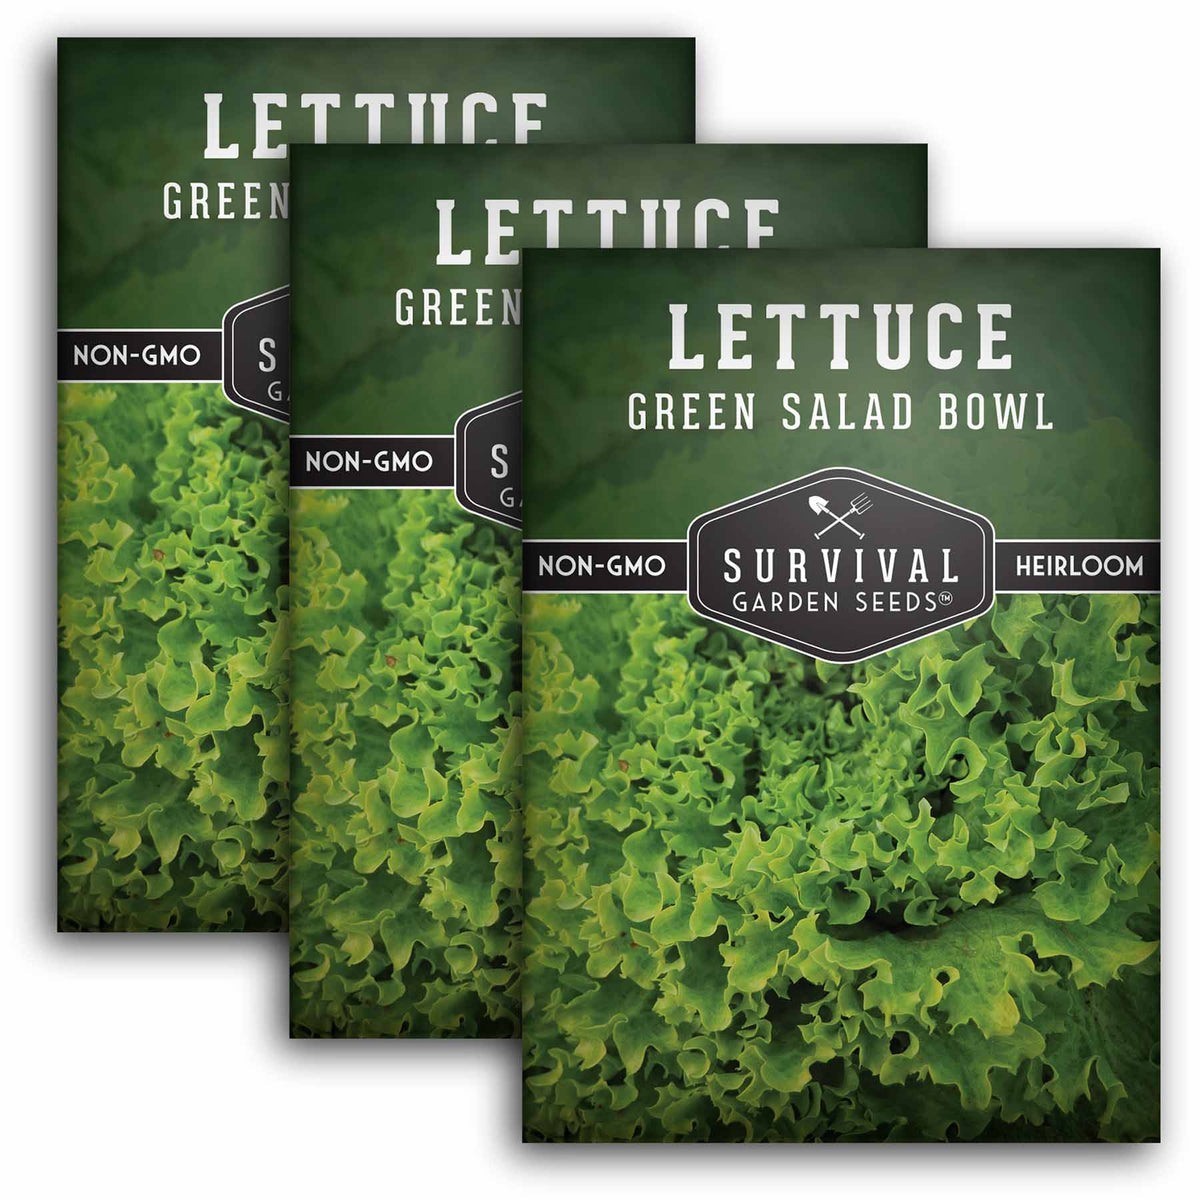 3 packets of Green Salad Bowl Lettuce seeds